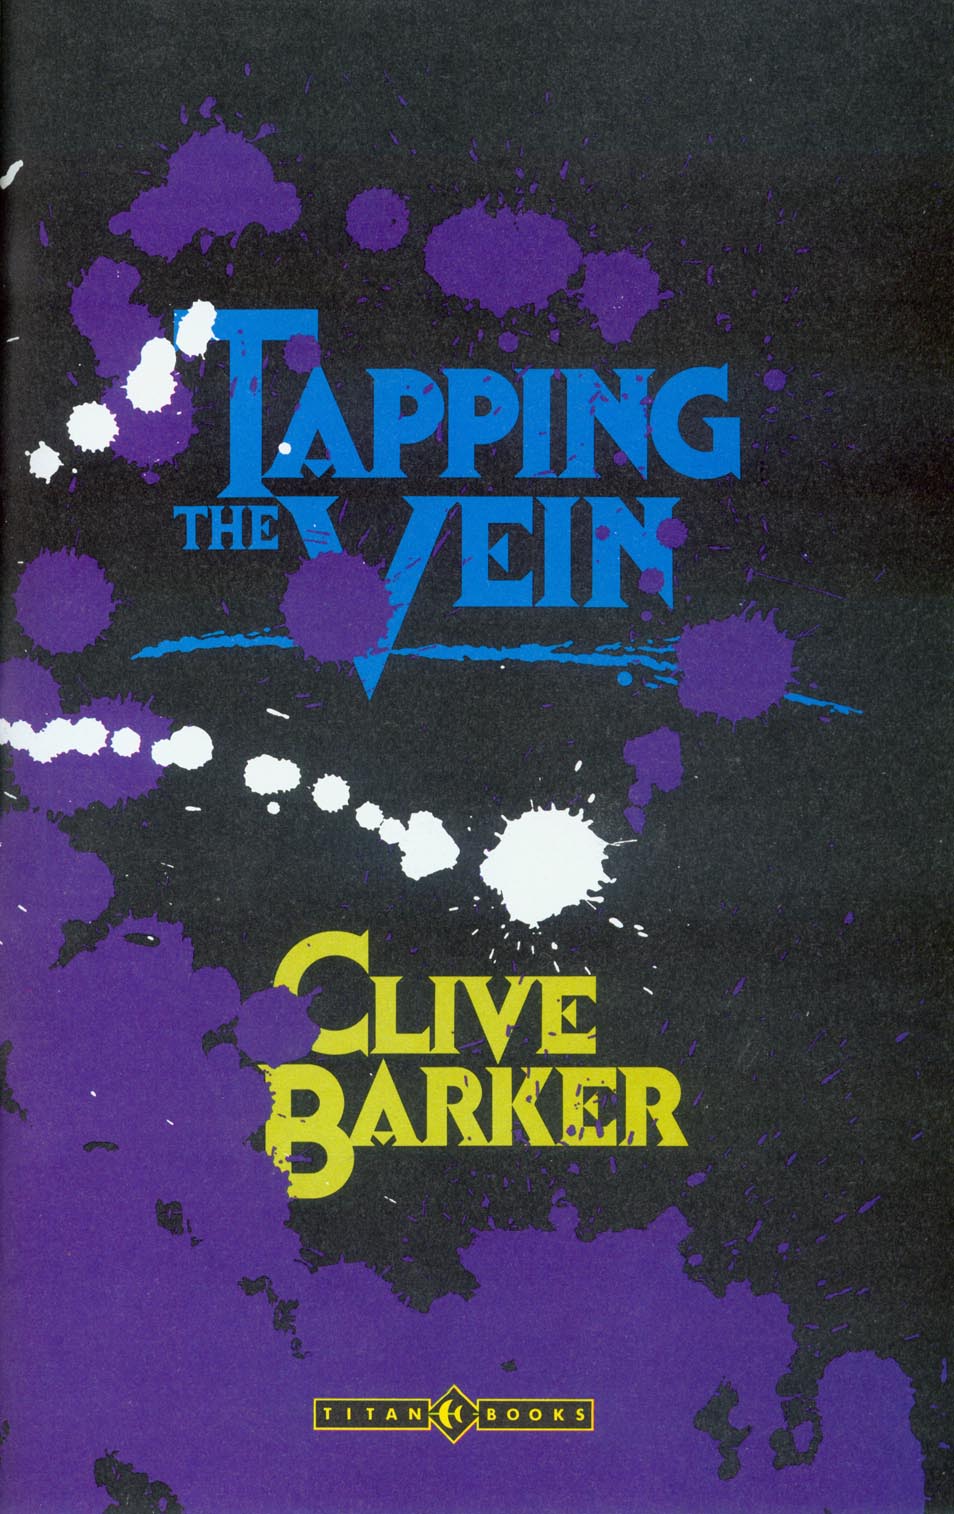 Read online Tapping the Vein comic -  Issue #1 - 3